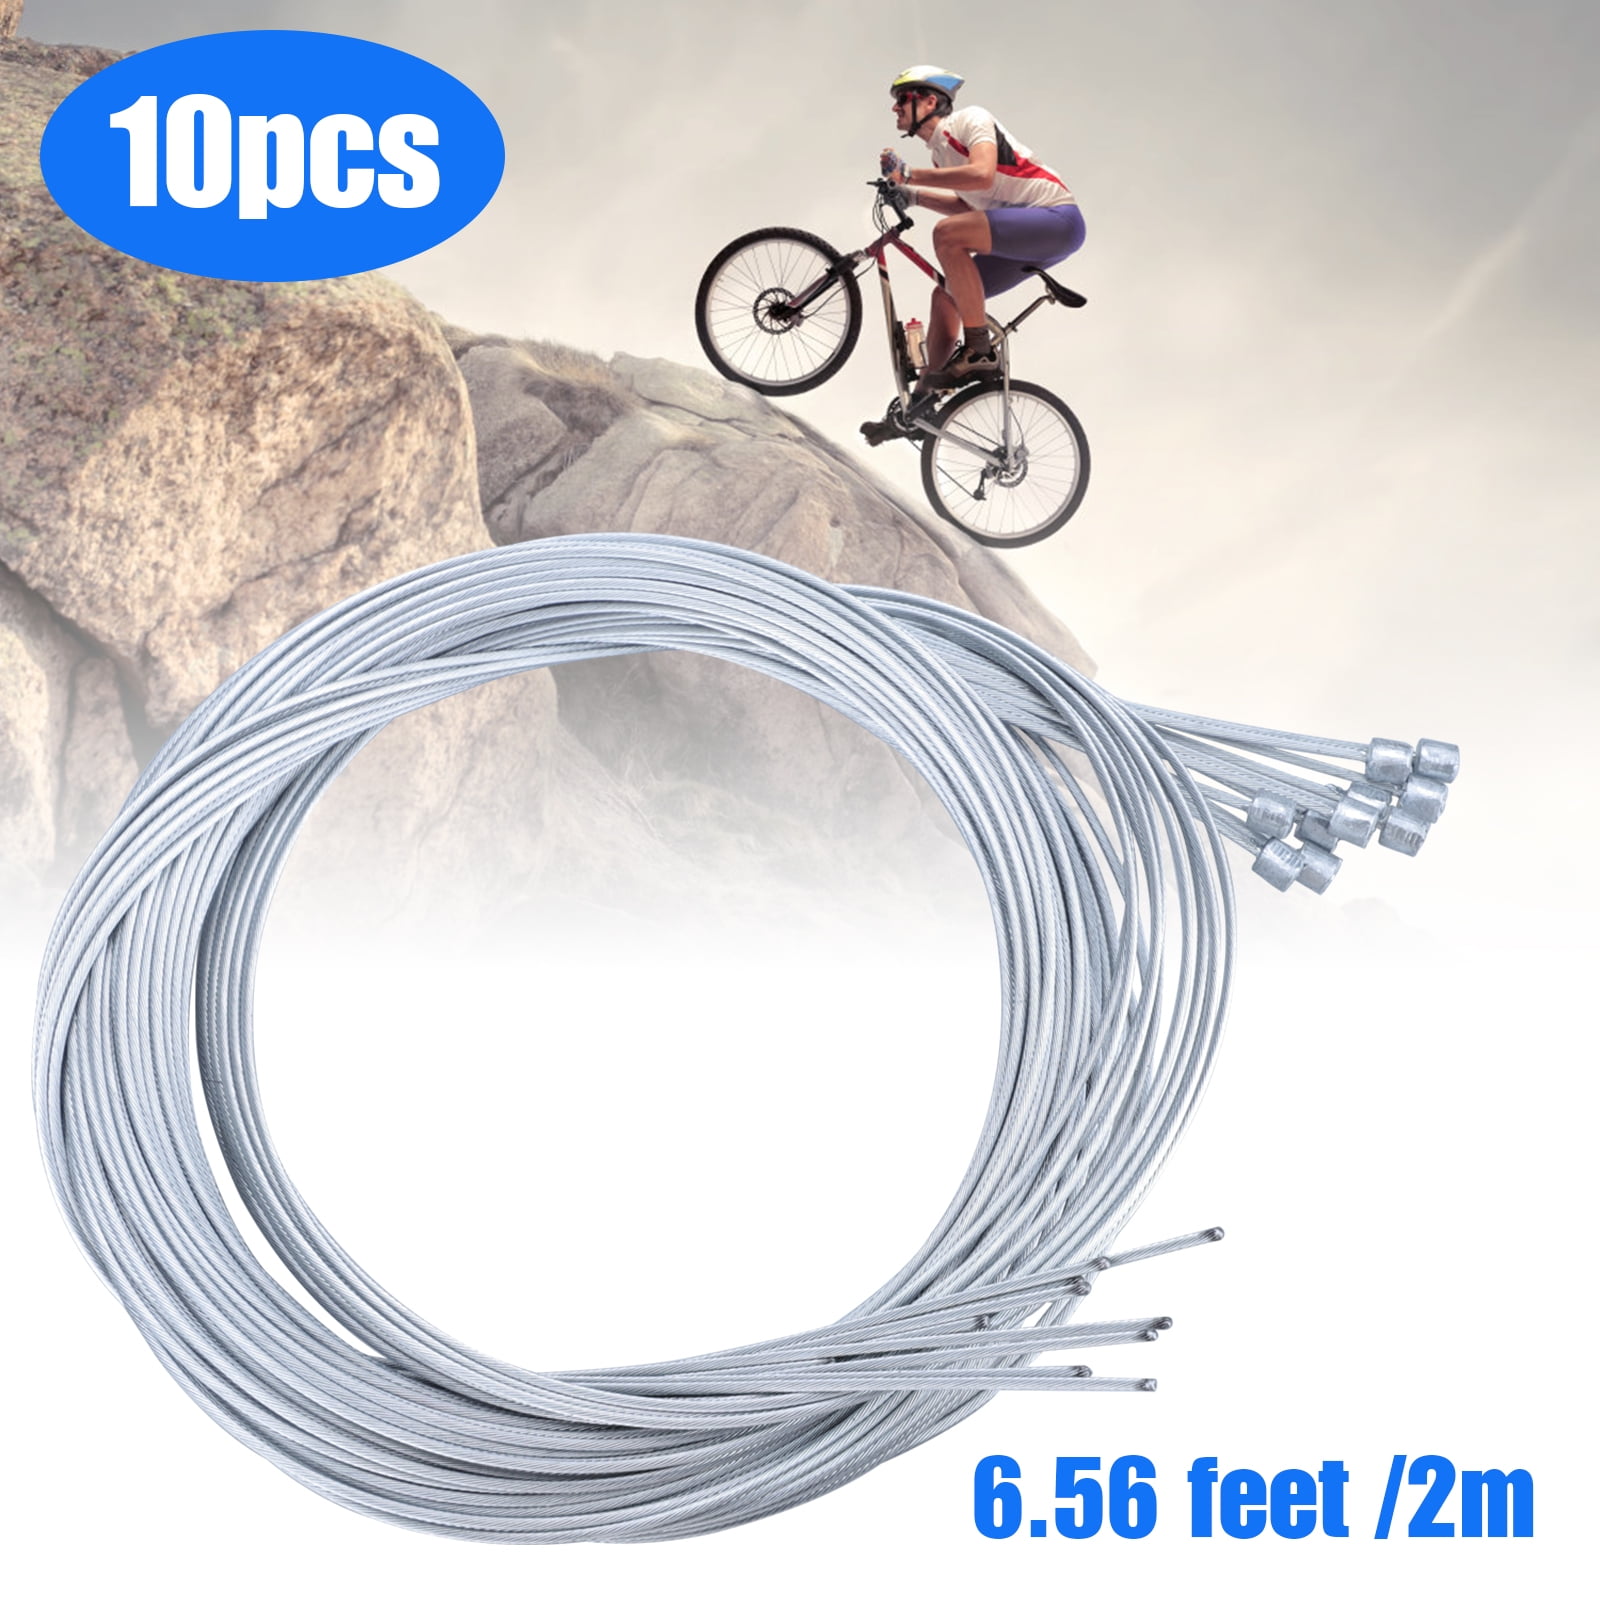 Universal Bicycle Transmission Line Bicycle Shift Derailleur Cable and Brake Cable Kit for MTB/Road Bike